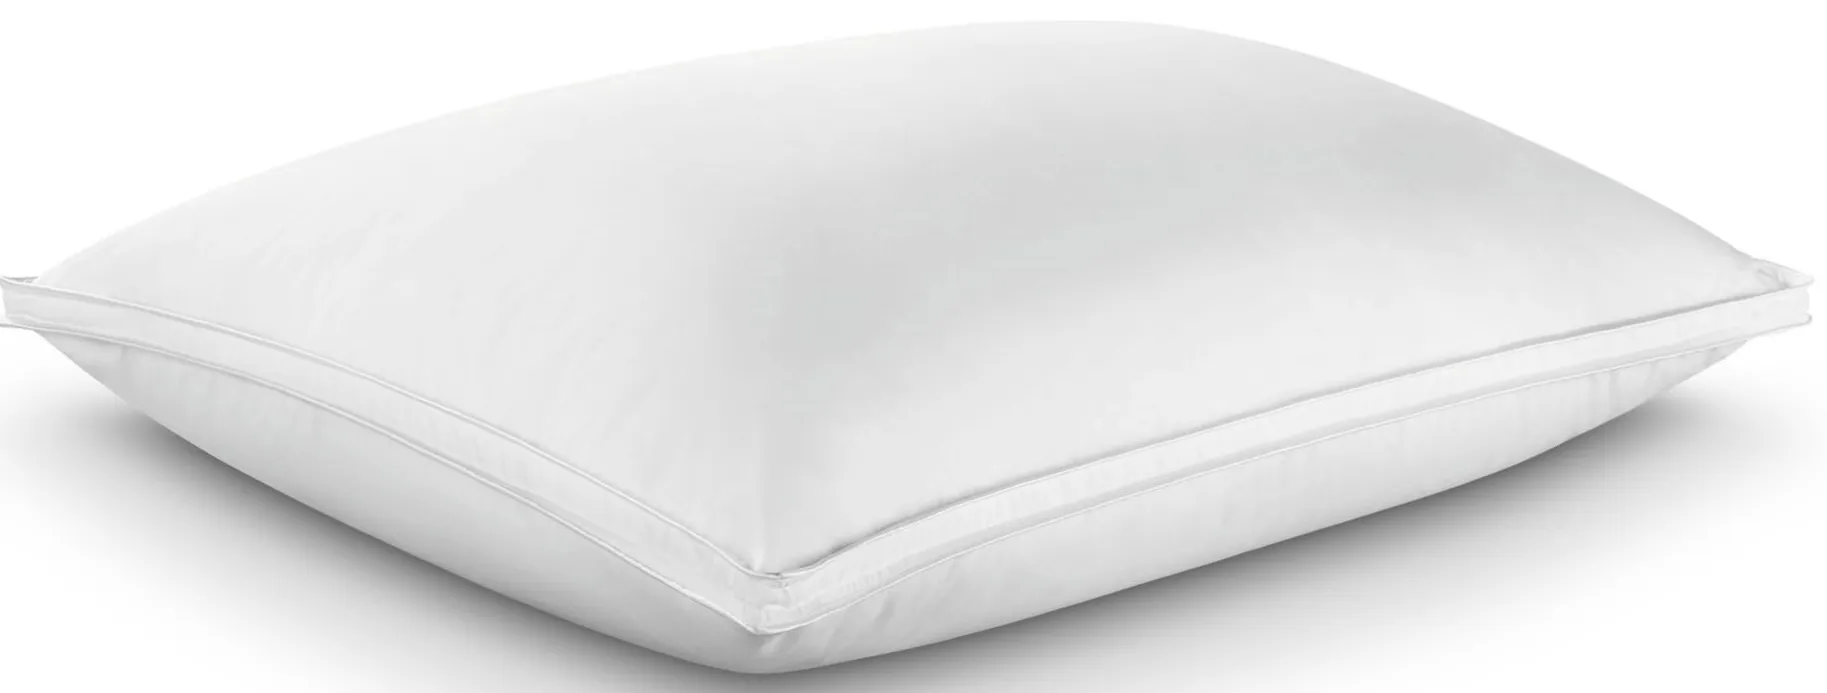 PureCare Cooling Down Complete Pillow in White by PureCare